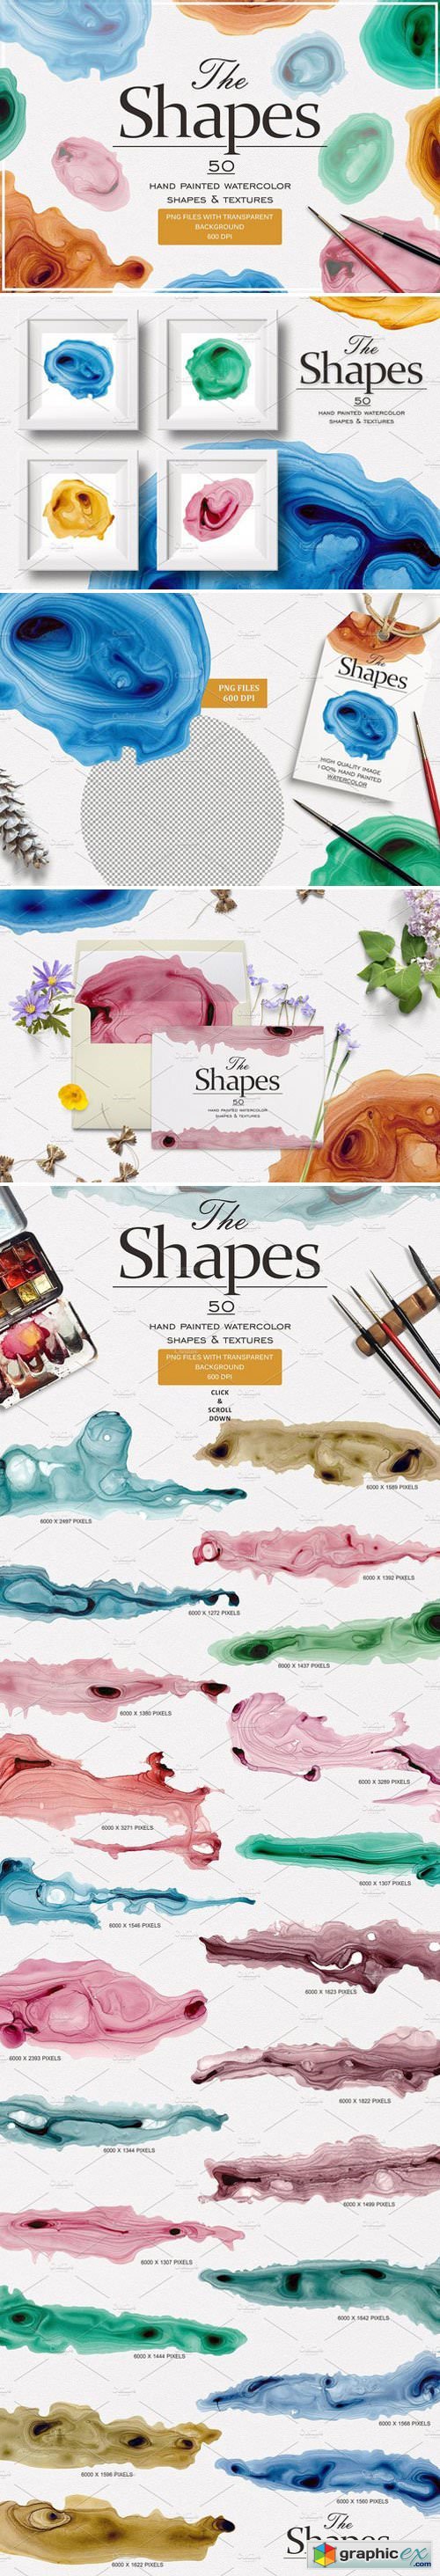 The Shapes (watercolor textures)